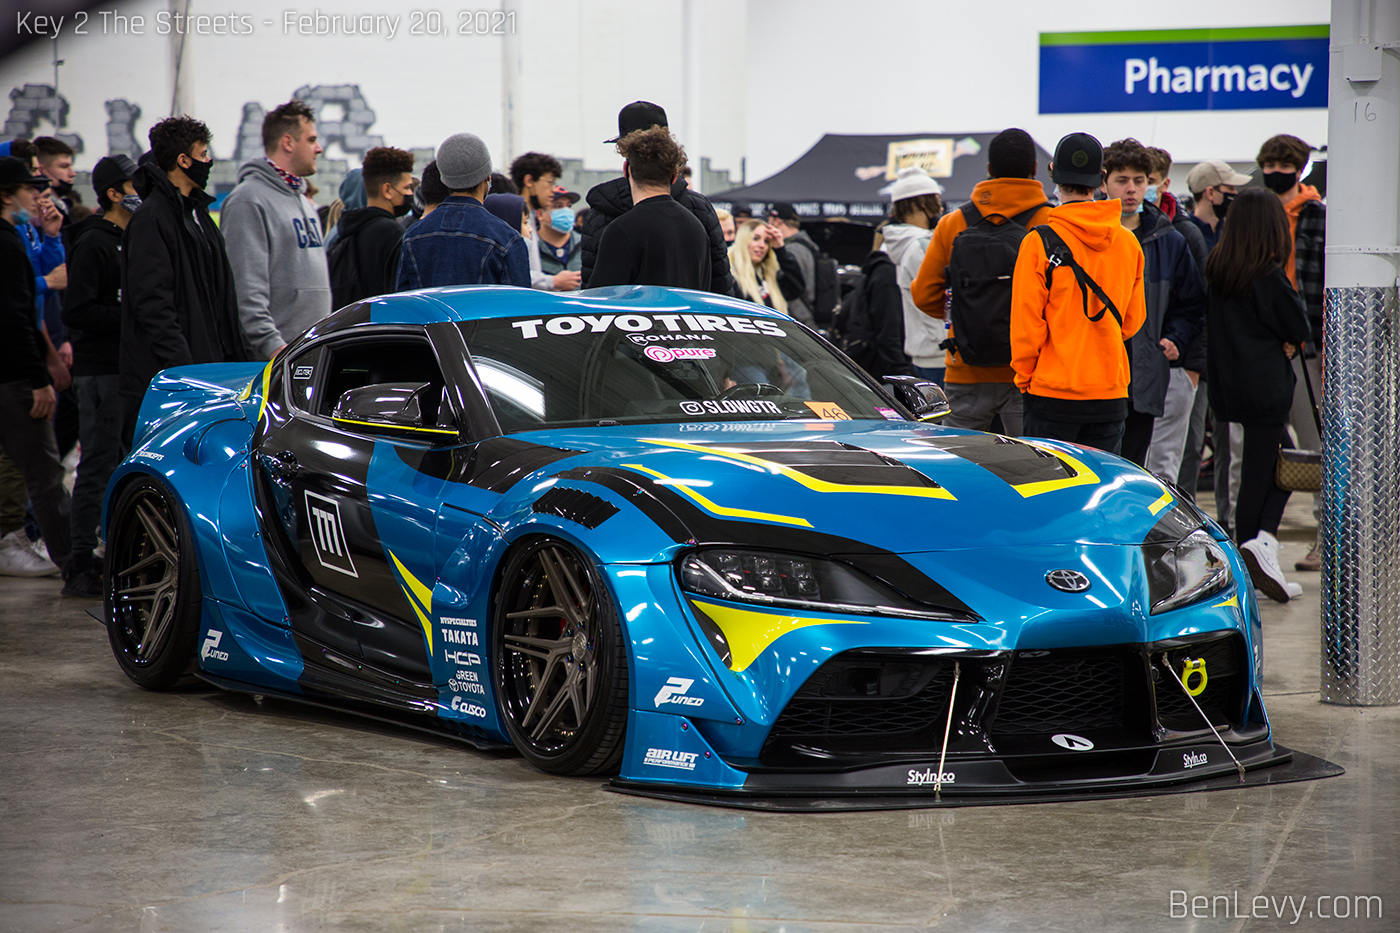 Teal Toyota Supra with lots of graphics